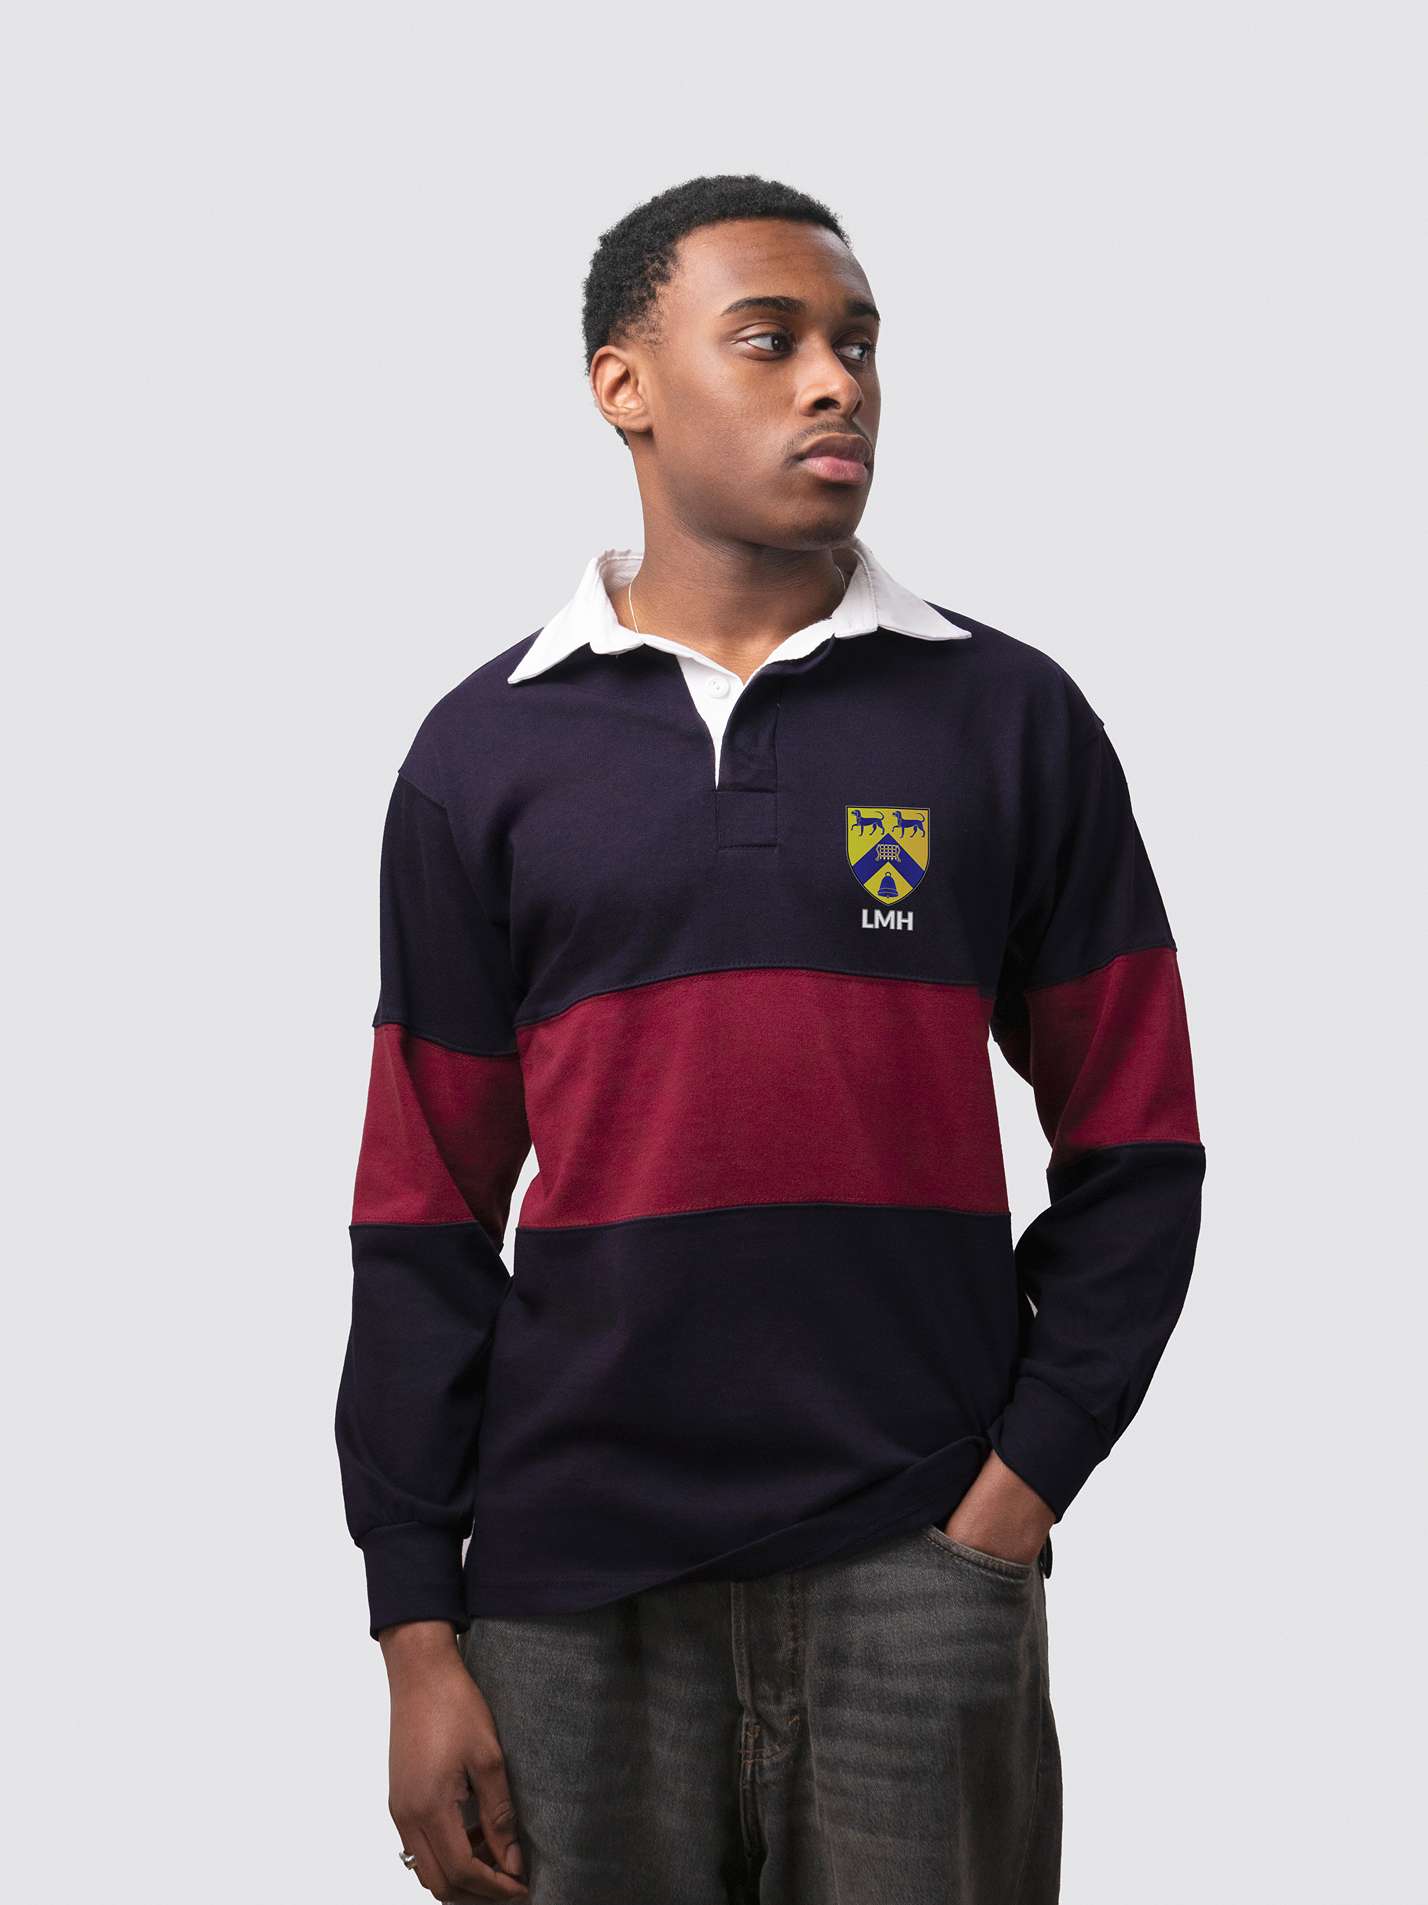 Lady Margaret Hall Oxford Unisex Panelled Rugby Shirt